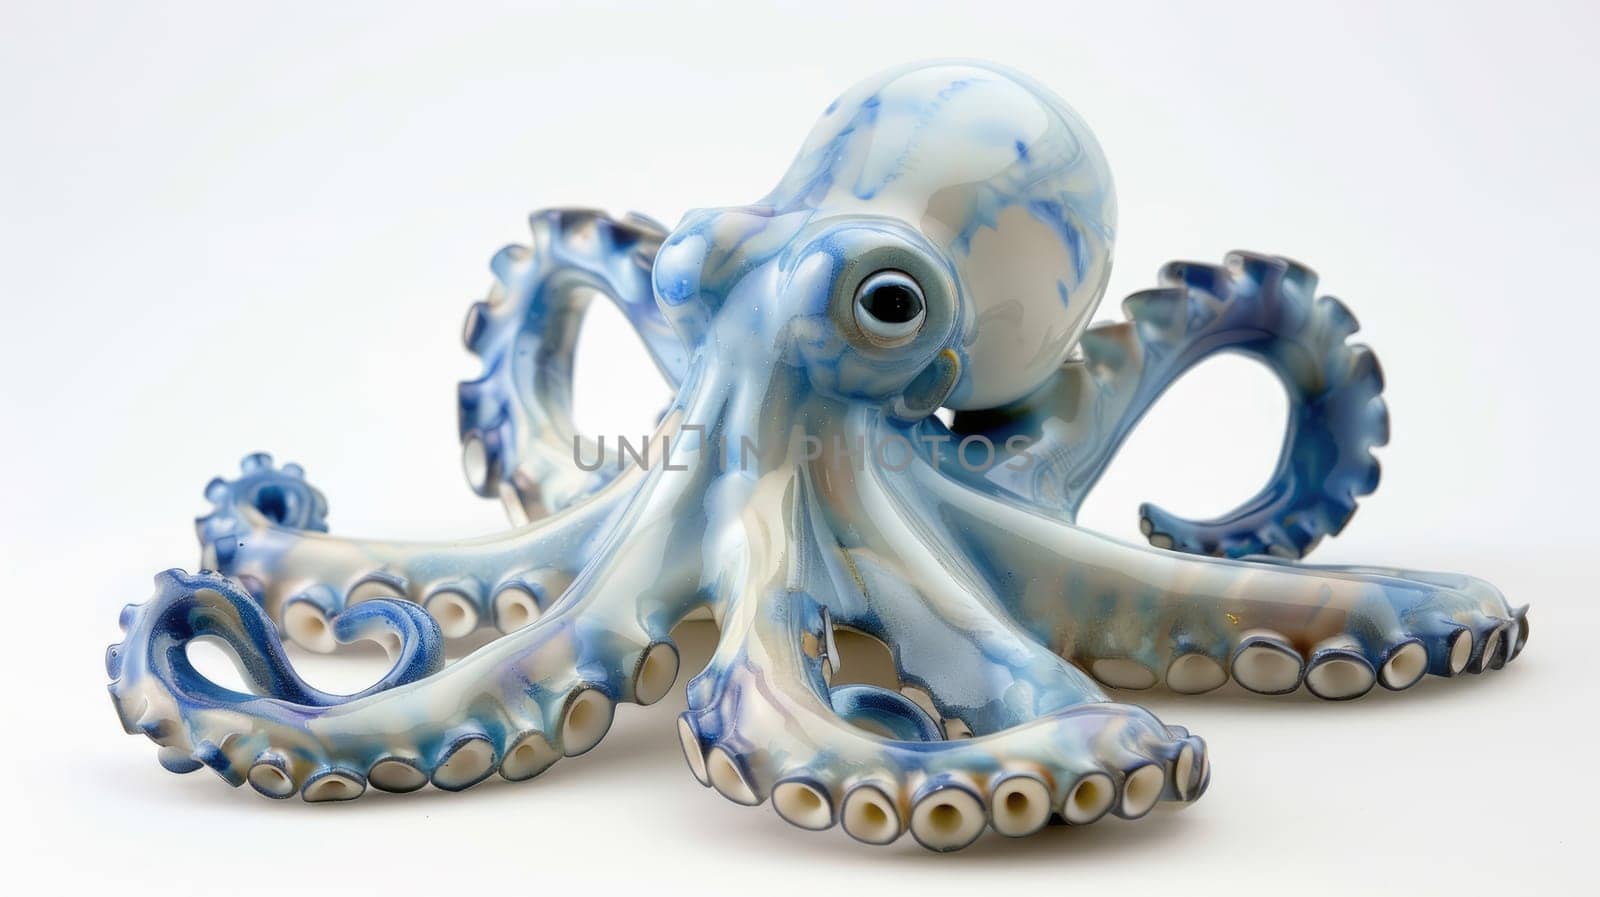 Porcelain figurine of an octopus, in blue and pearlescent tones AI